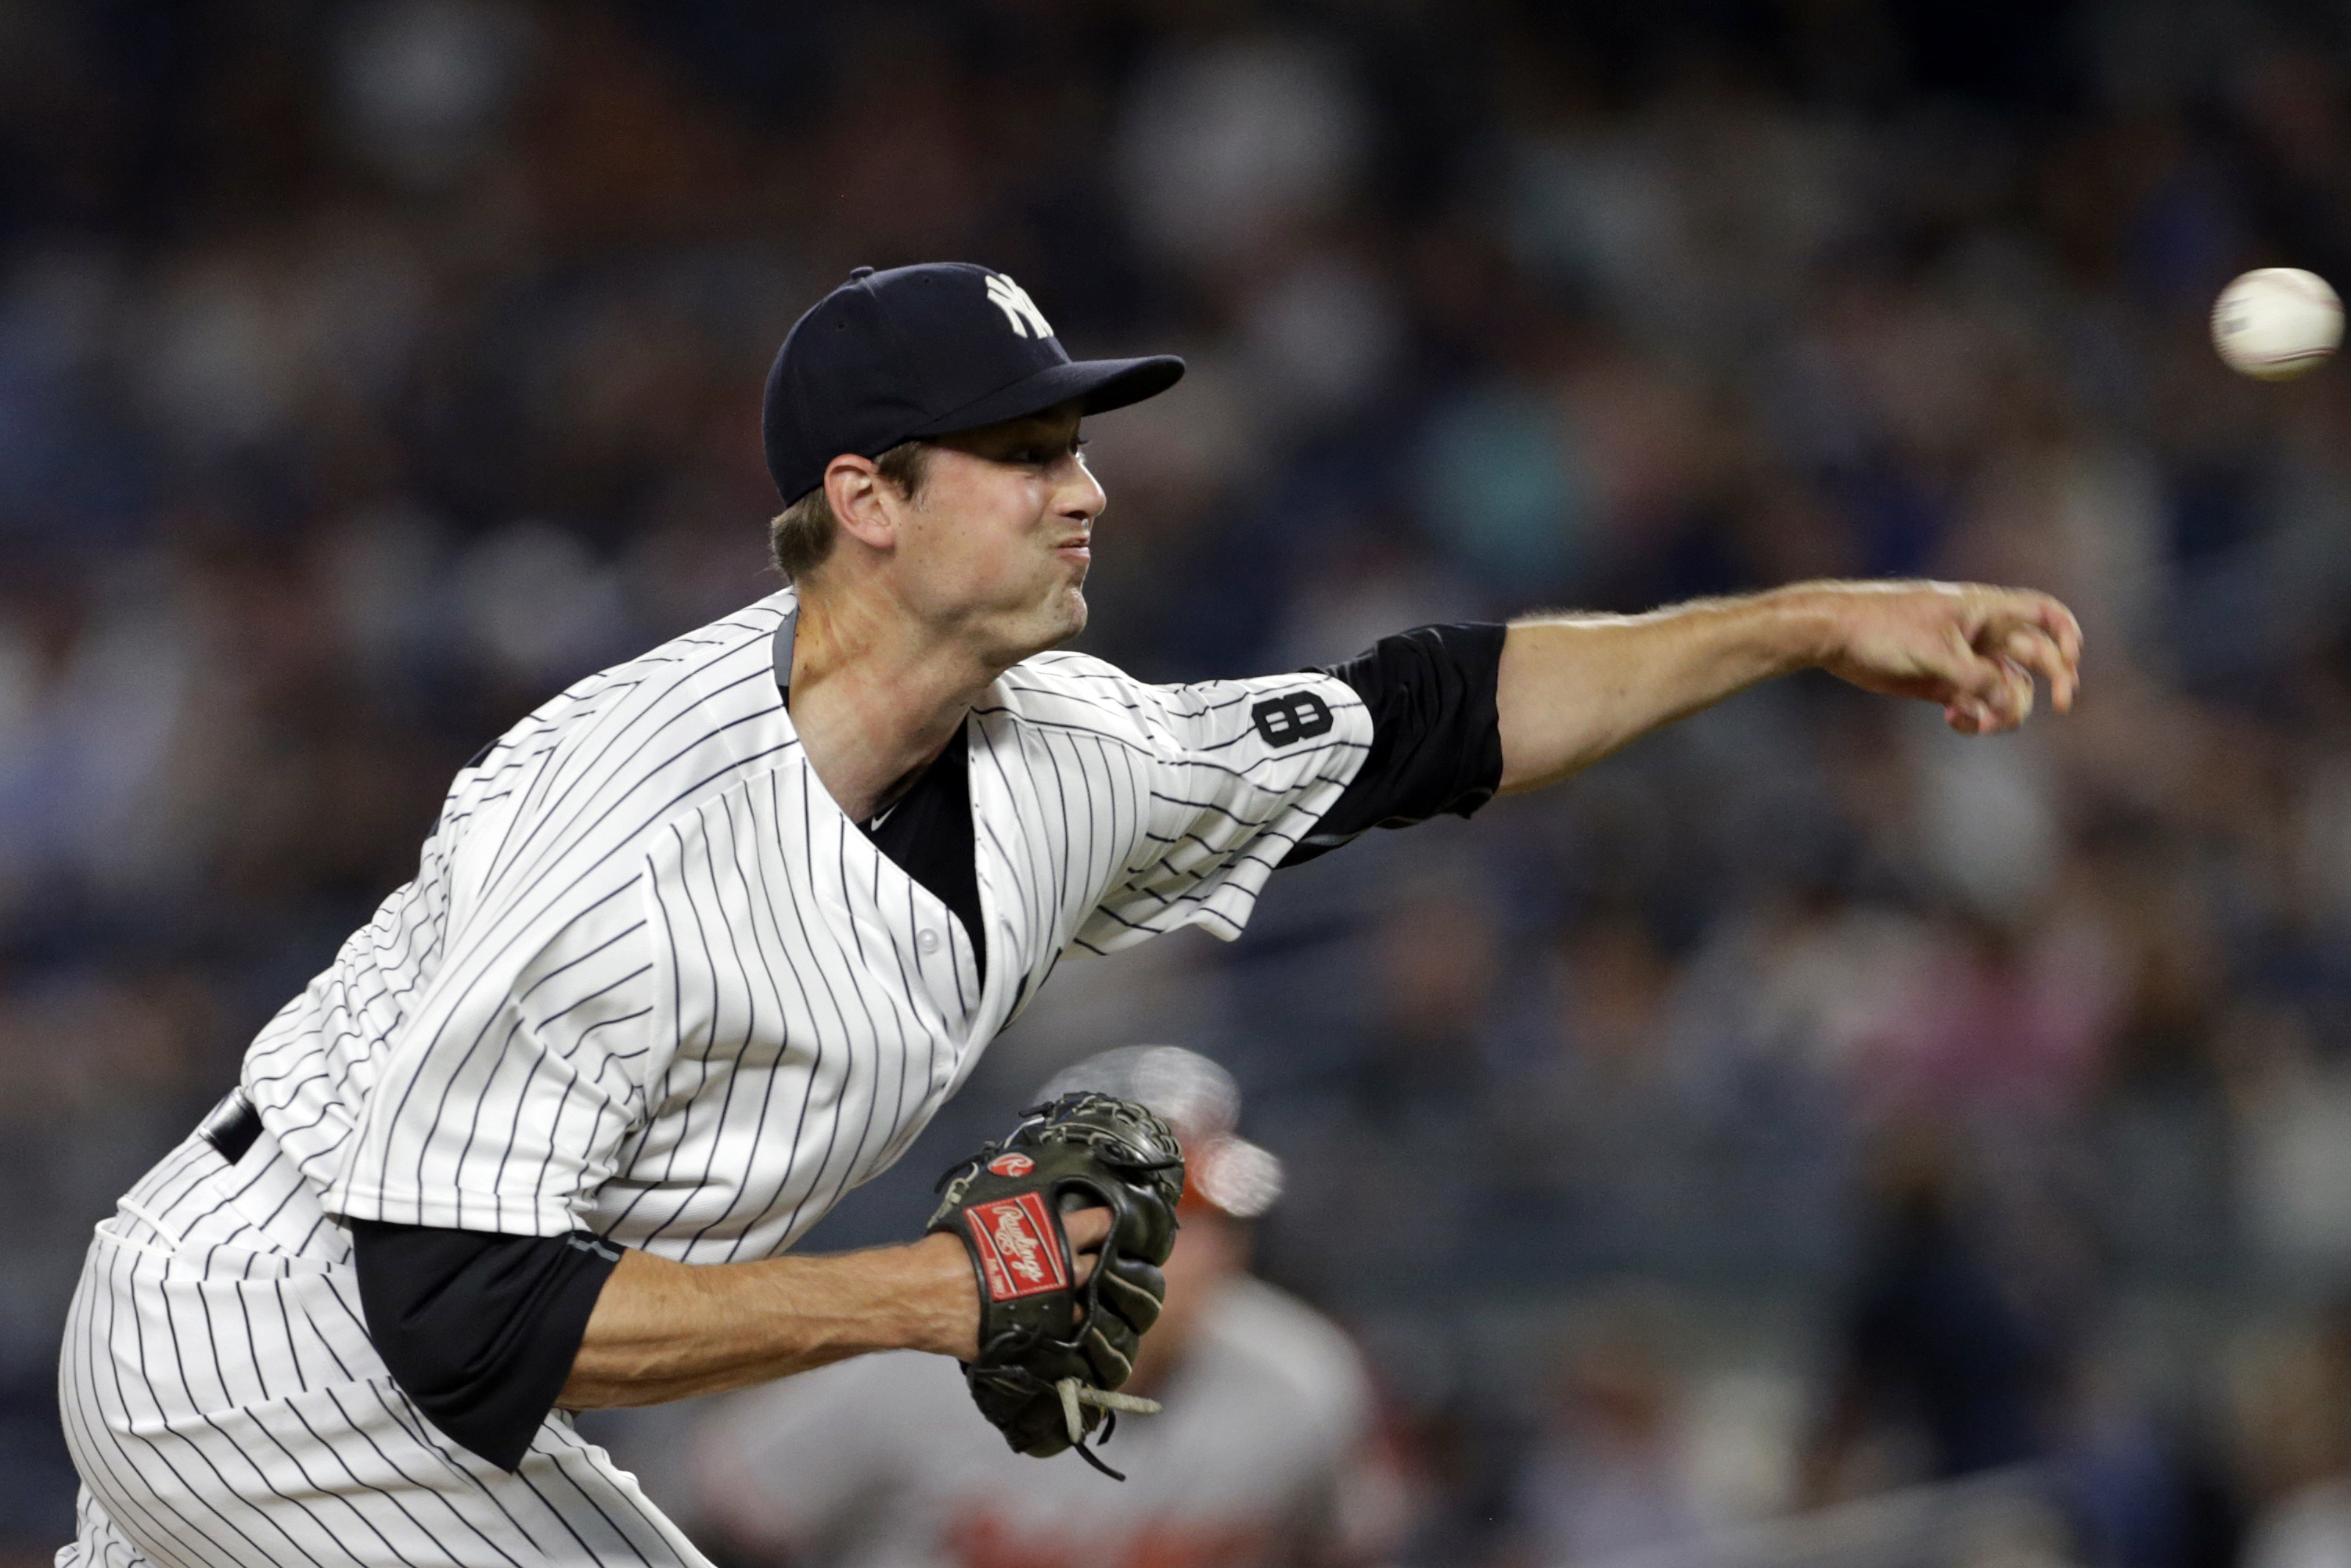 Andrew Miller leaves game after facing one batter and throwing